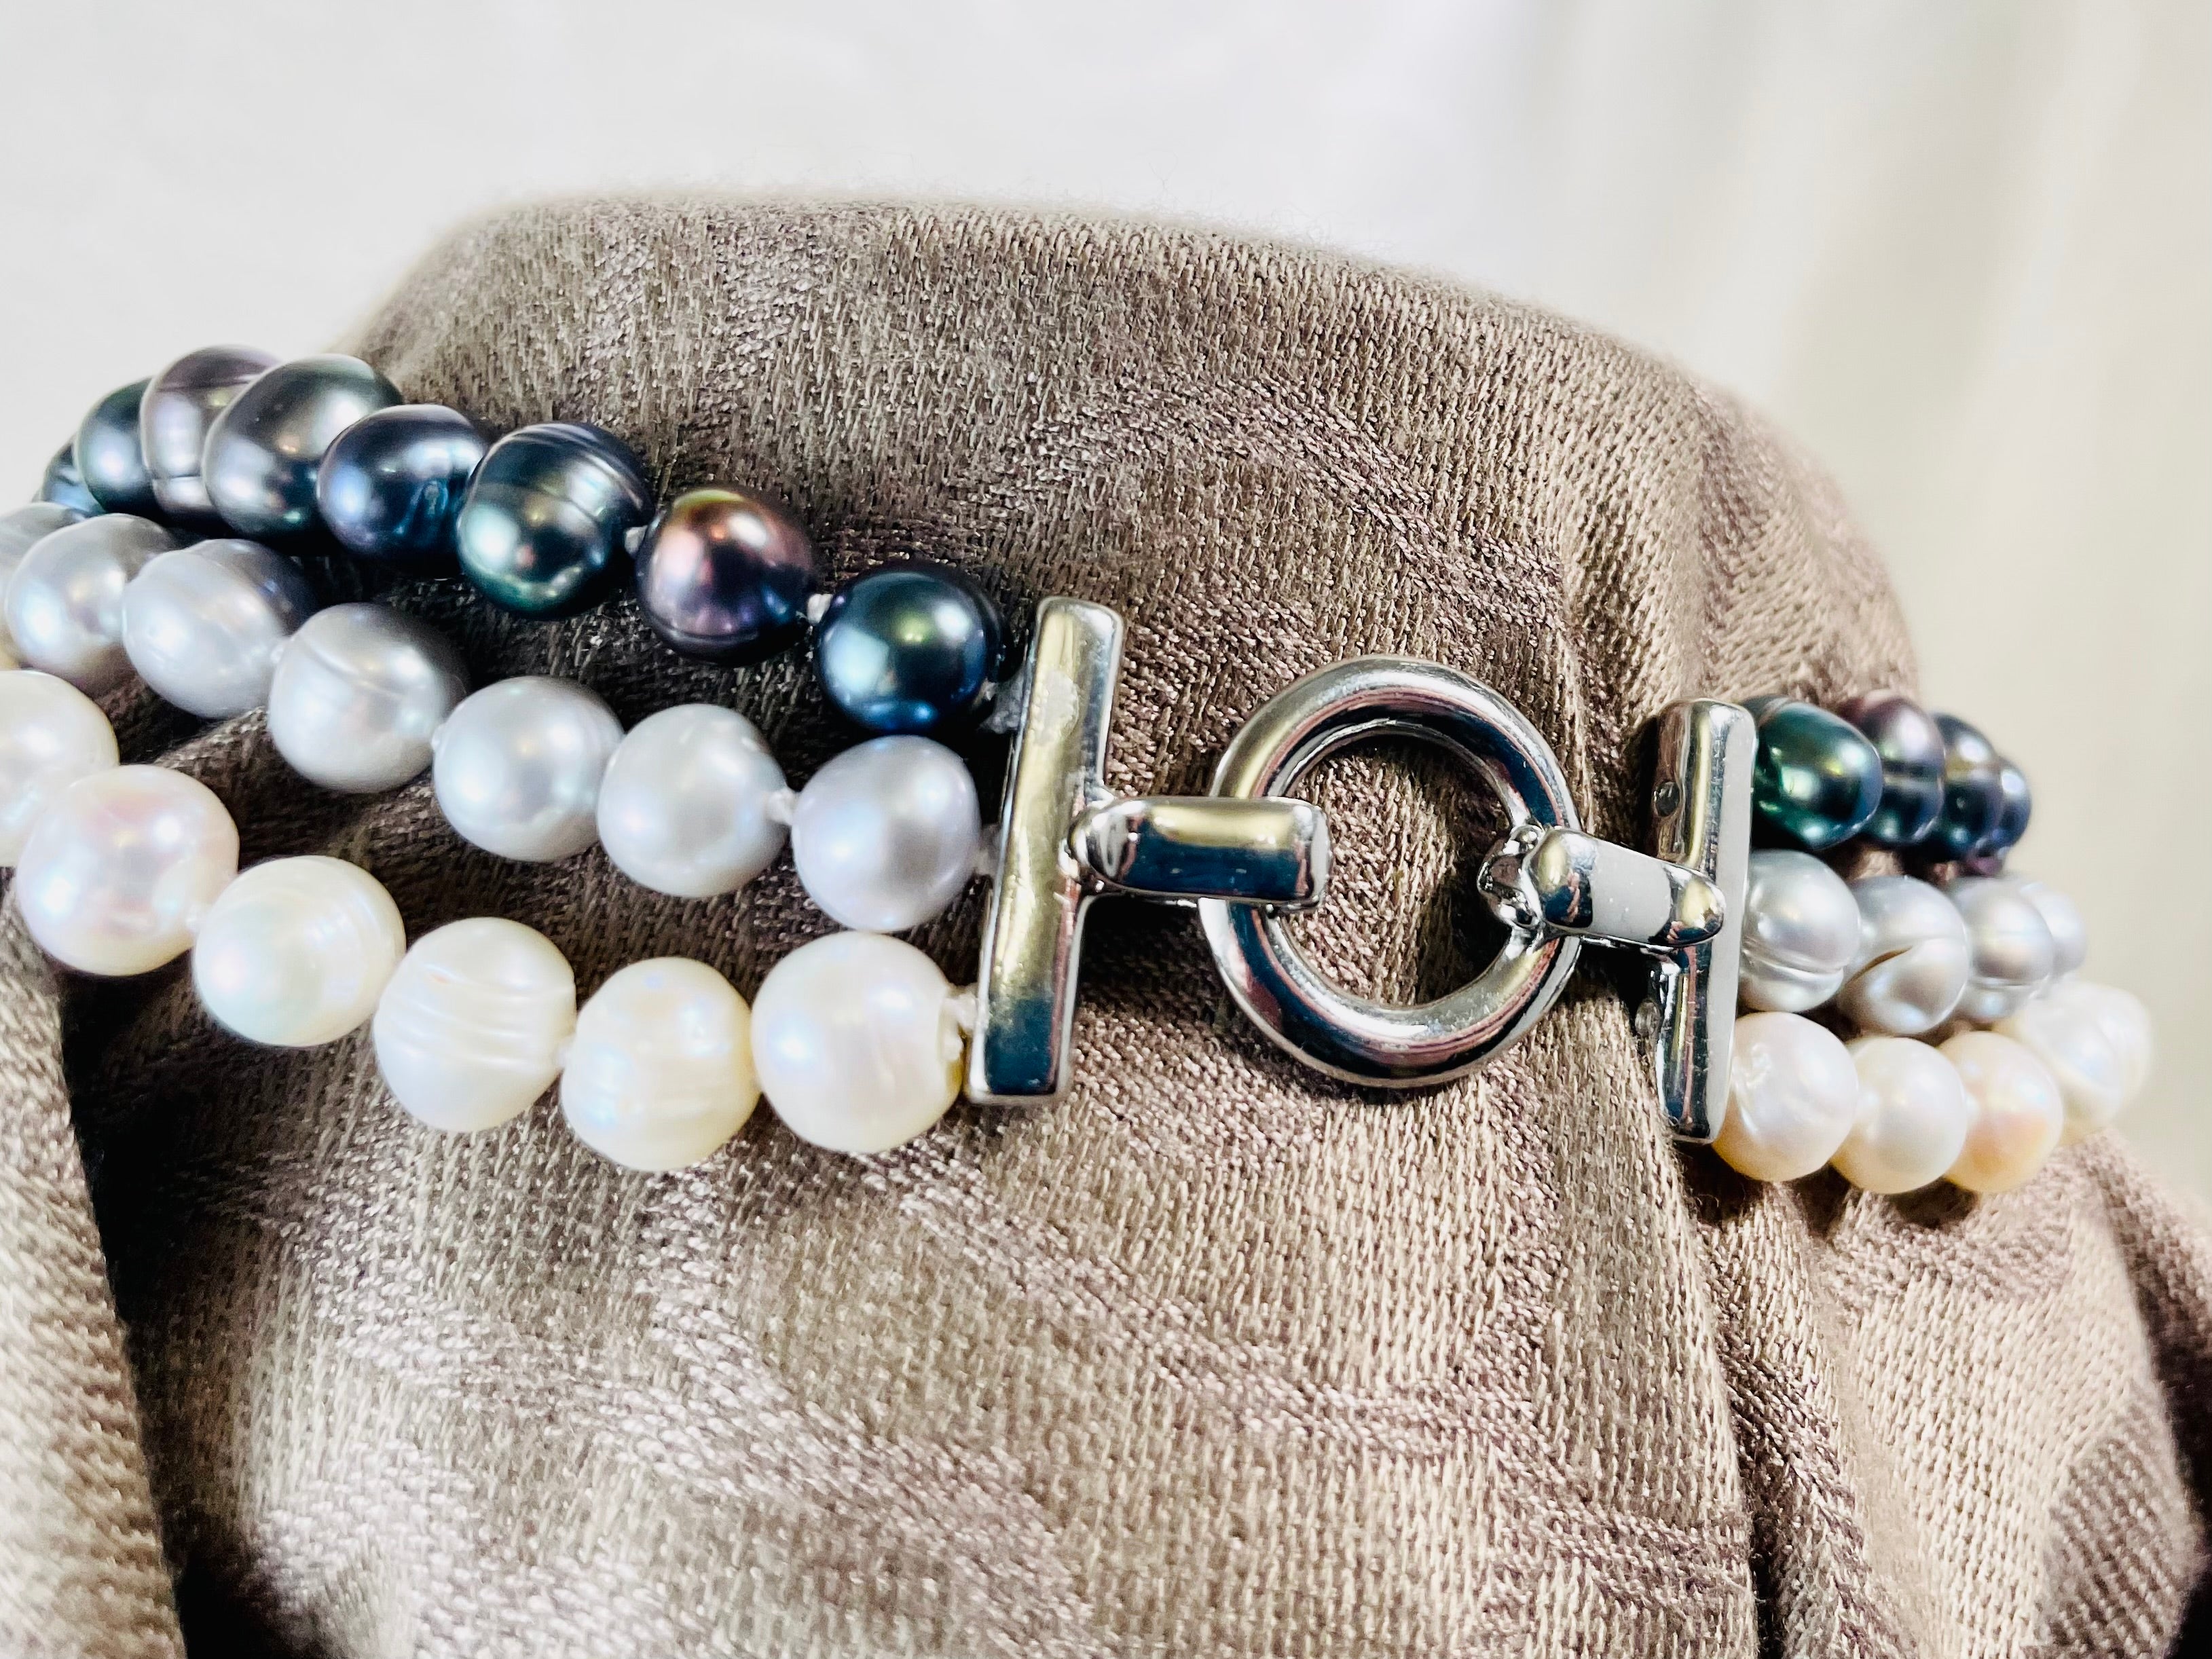 Triple strand ombré white, silver, and peacock pearl necklace